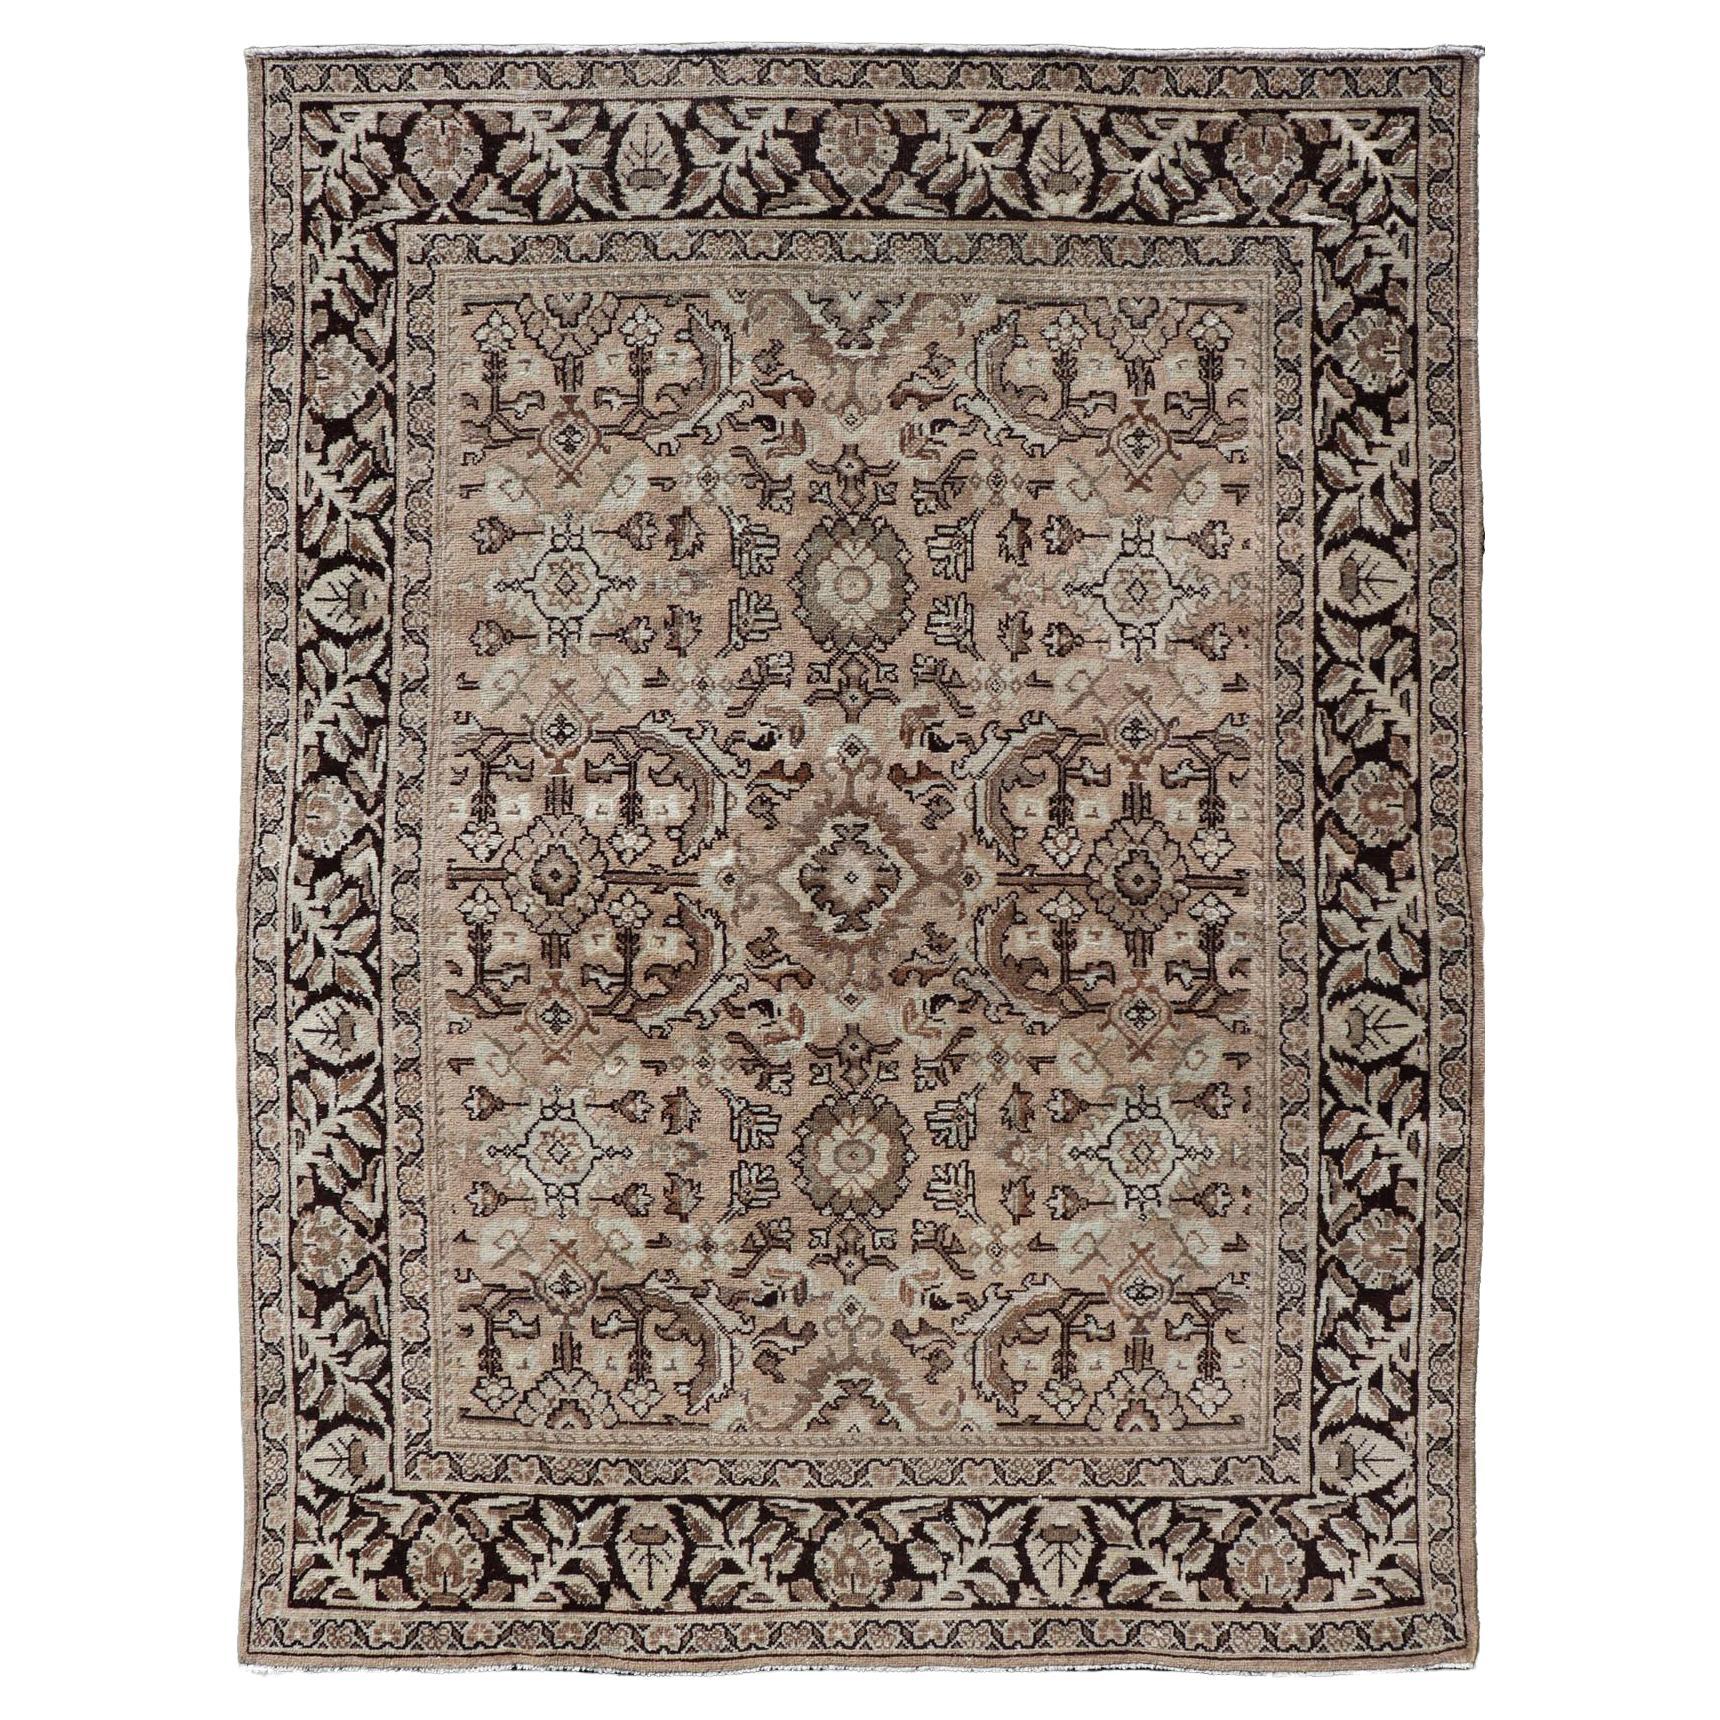 Vintage Sultanabad-Mahal Rug with All-Over Sub-Geometric Medallion Design